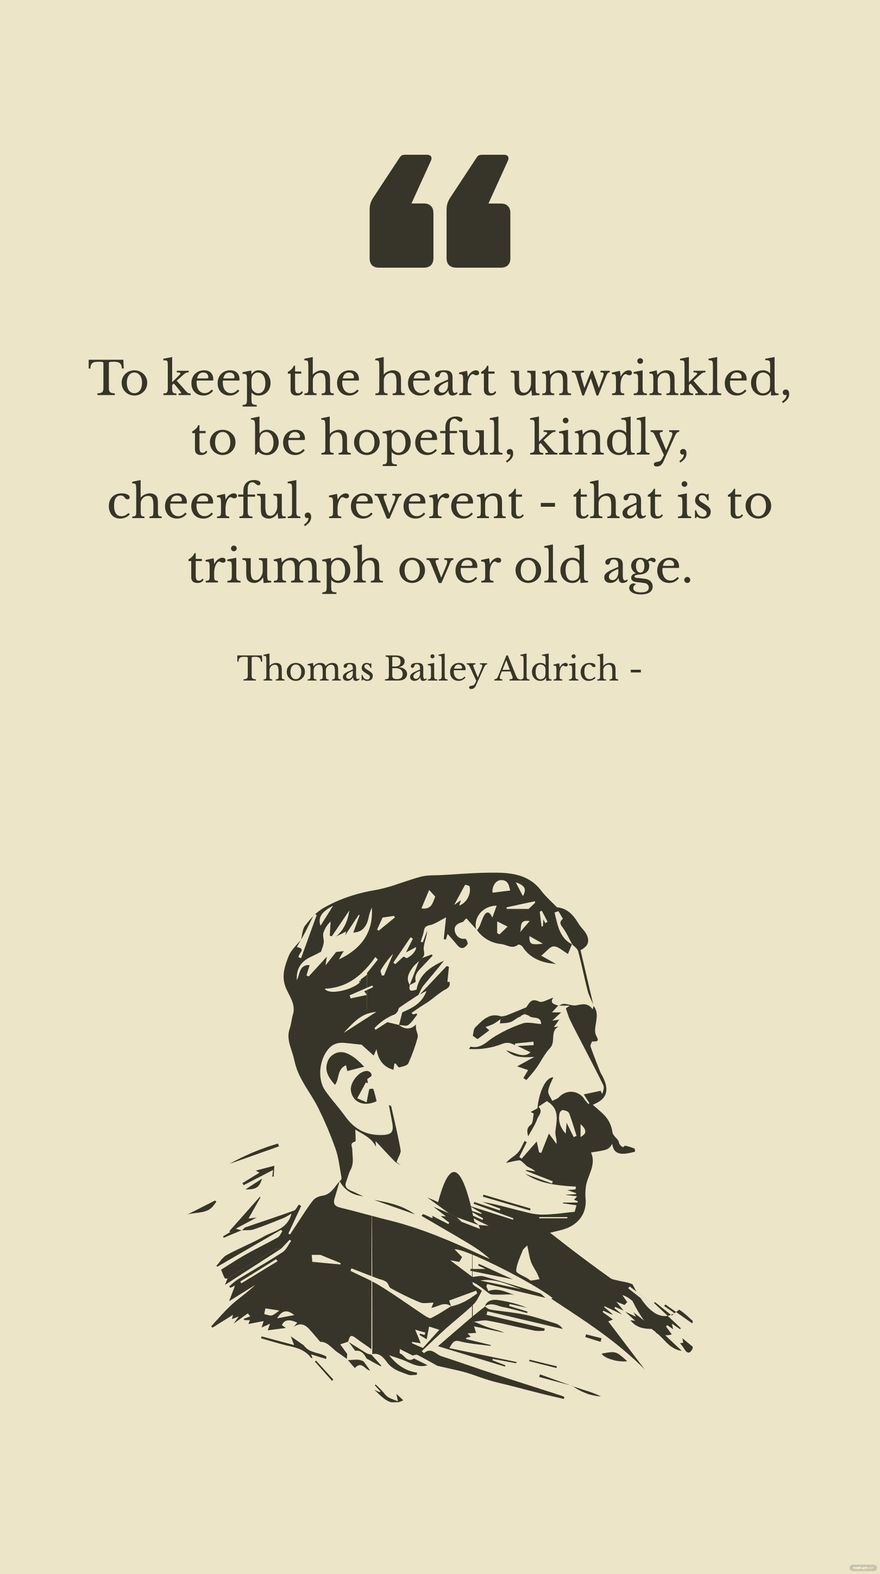 Free Thomas Bailey Aldrich - To keep the heart unwrinkled, to be hopeful, kindly, cheerful, reverent - that is to triumph over old age. in JPG